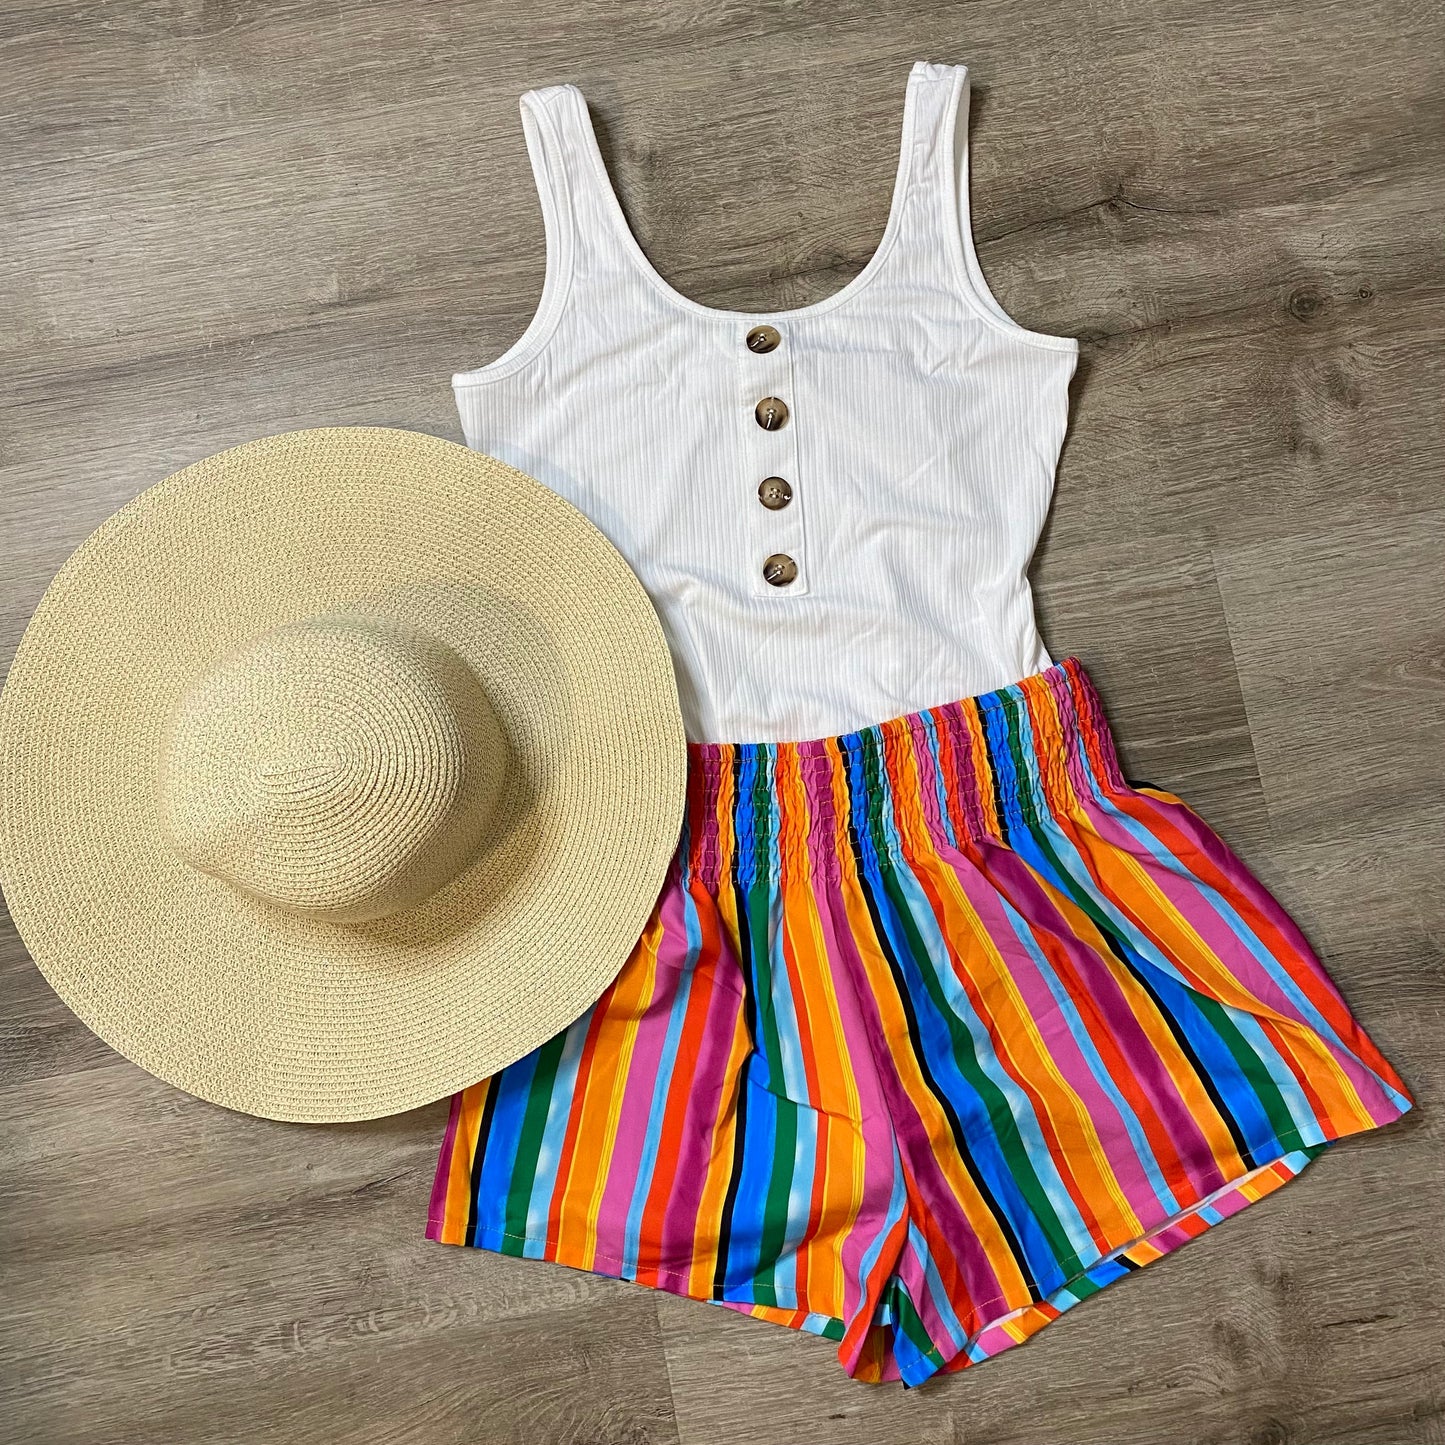 Fiesta Island shorts Description: Multicolor, Boho, Striped Shorts Wide Leg with Elastic Waist Shirred, High Waist, Cropped Loose with a Non-Stretch Material: Polyester 95% Polyester, 5% Elastane Care Instructions: Machine wash, tumble or air dry